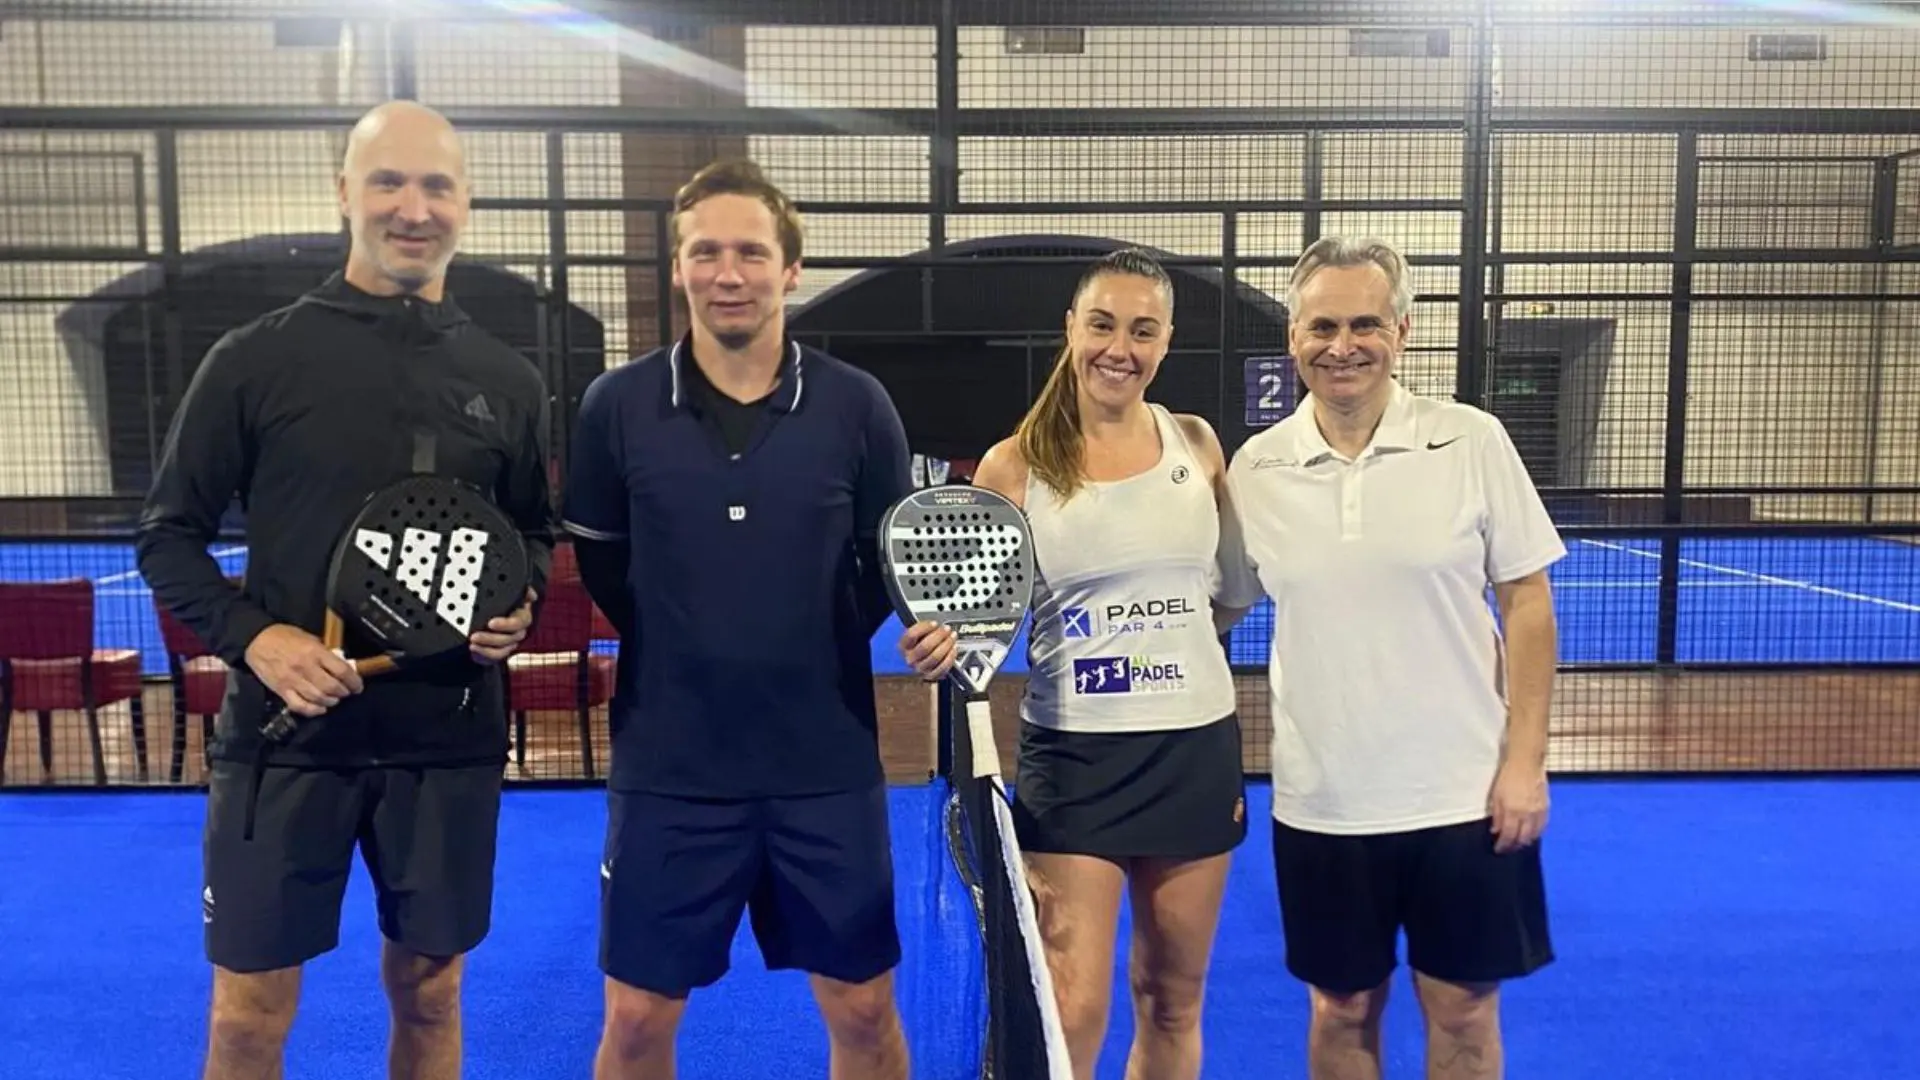 “Coach Laura” challenges Clément Chantôme and Thierry Omeyer